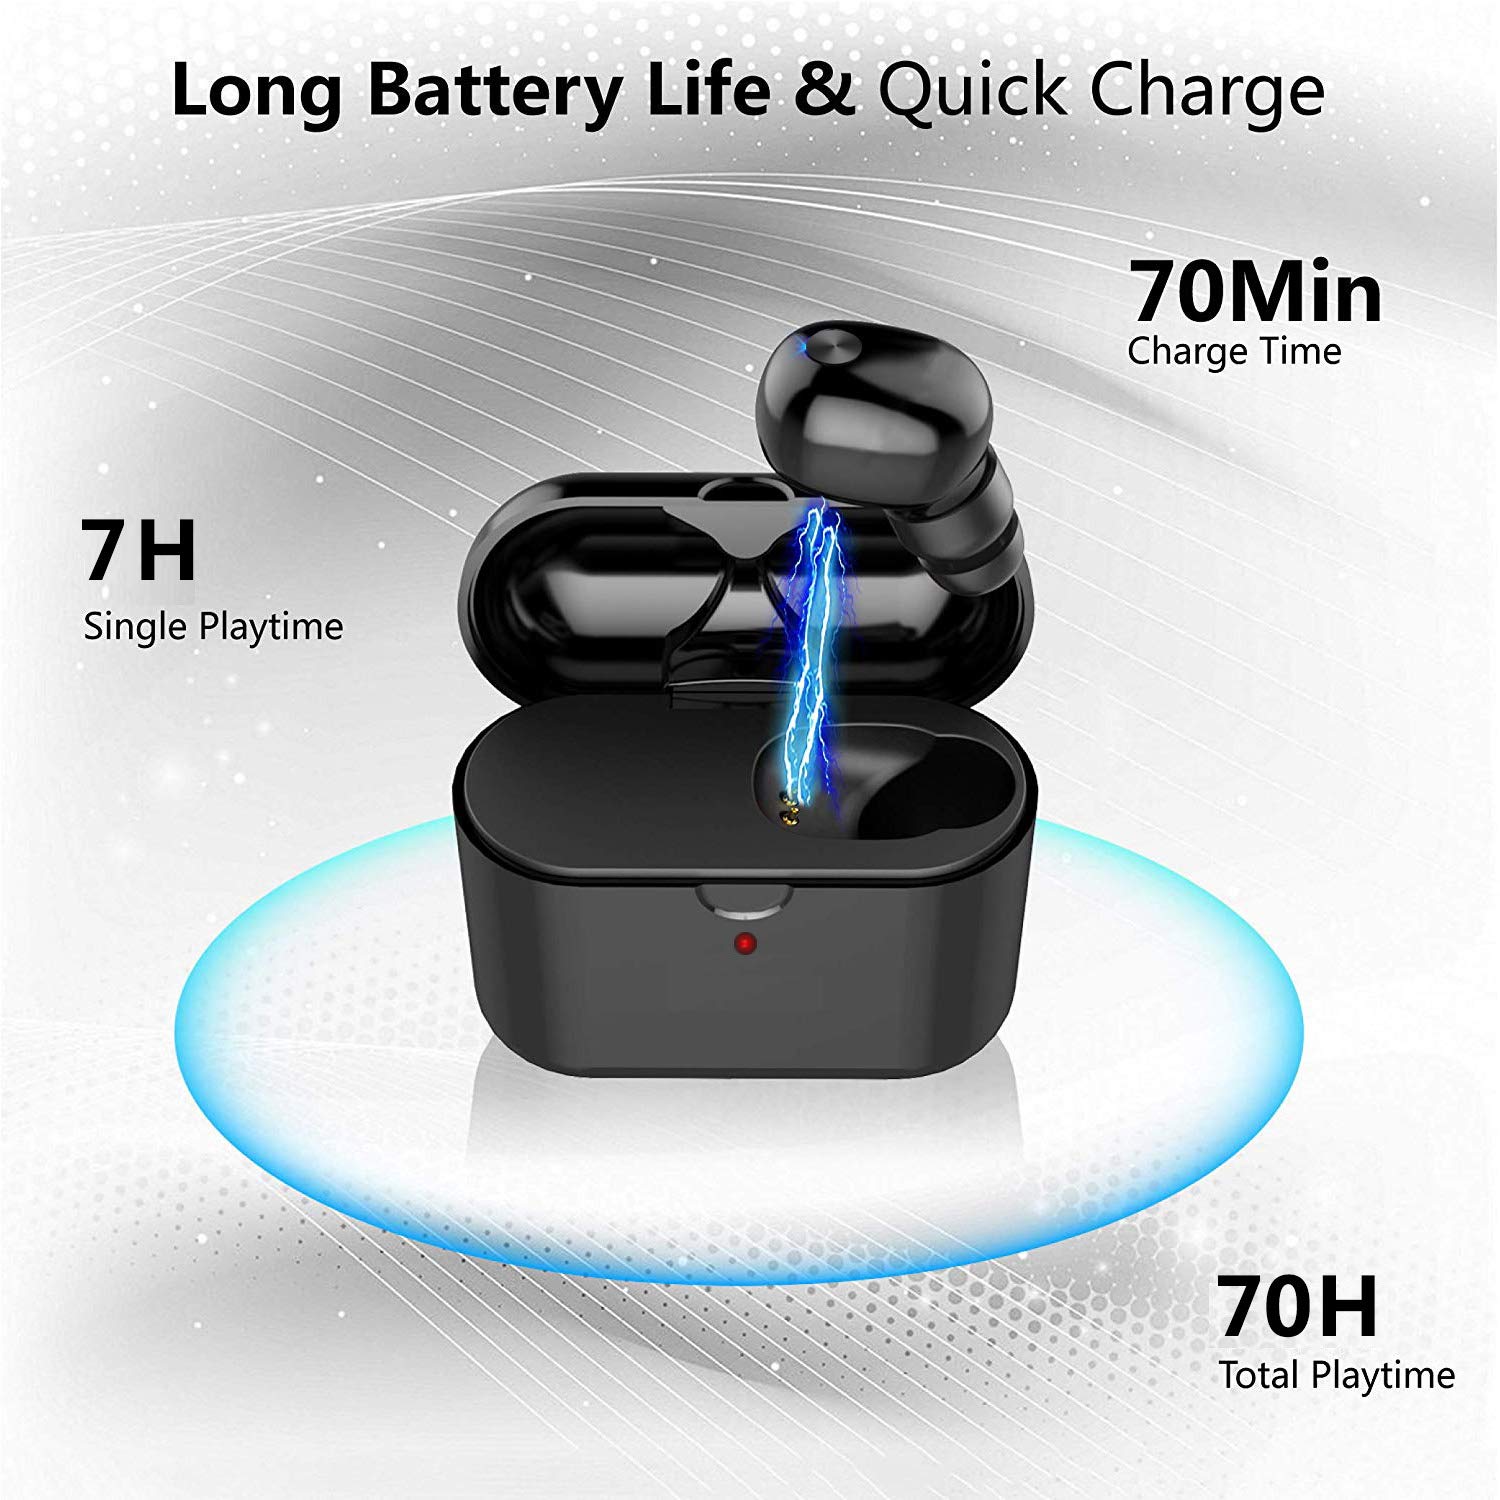 Wireless Bluetooth Earphone,Mini Bluetooth Earbud, Single Wireless Earbud with 48 Hour Battery Life - 700 mAh Charging Case, Invisible Headphone Earpiece 1pc Black - image 4 of 9